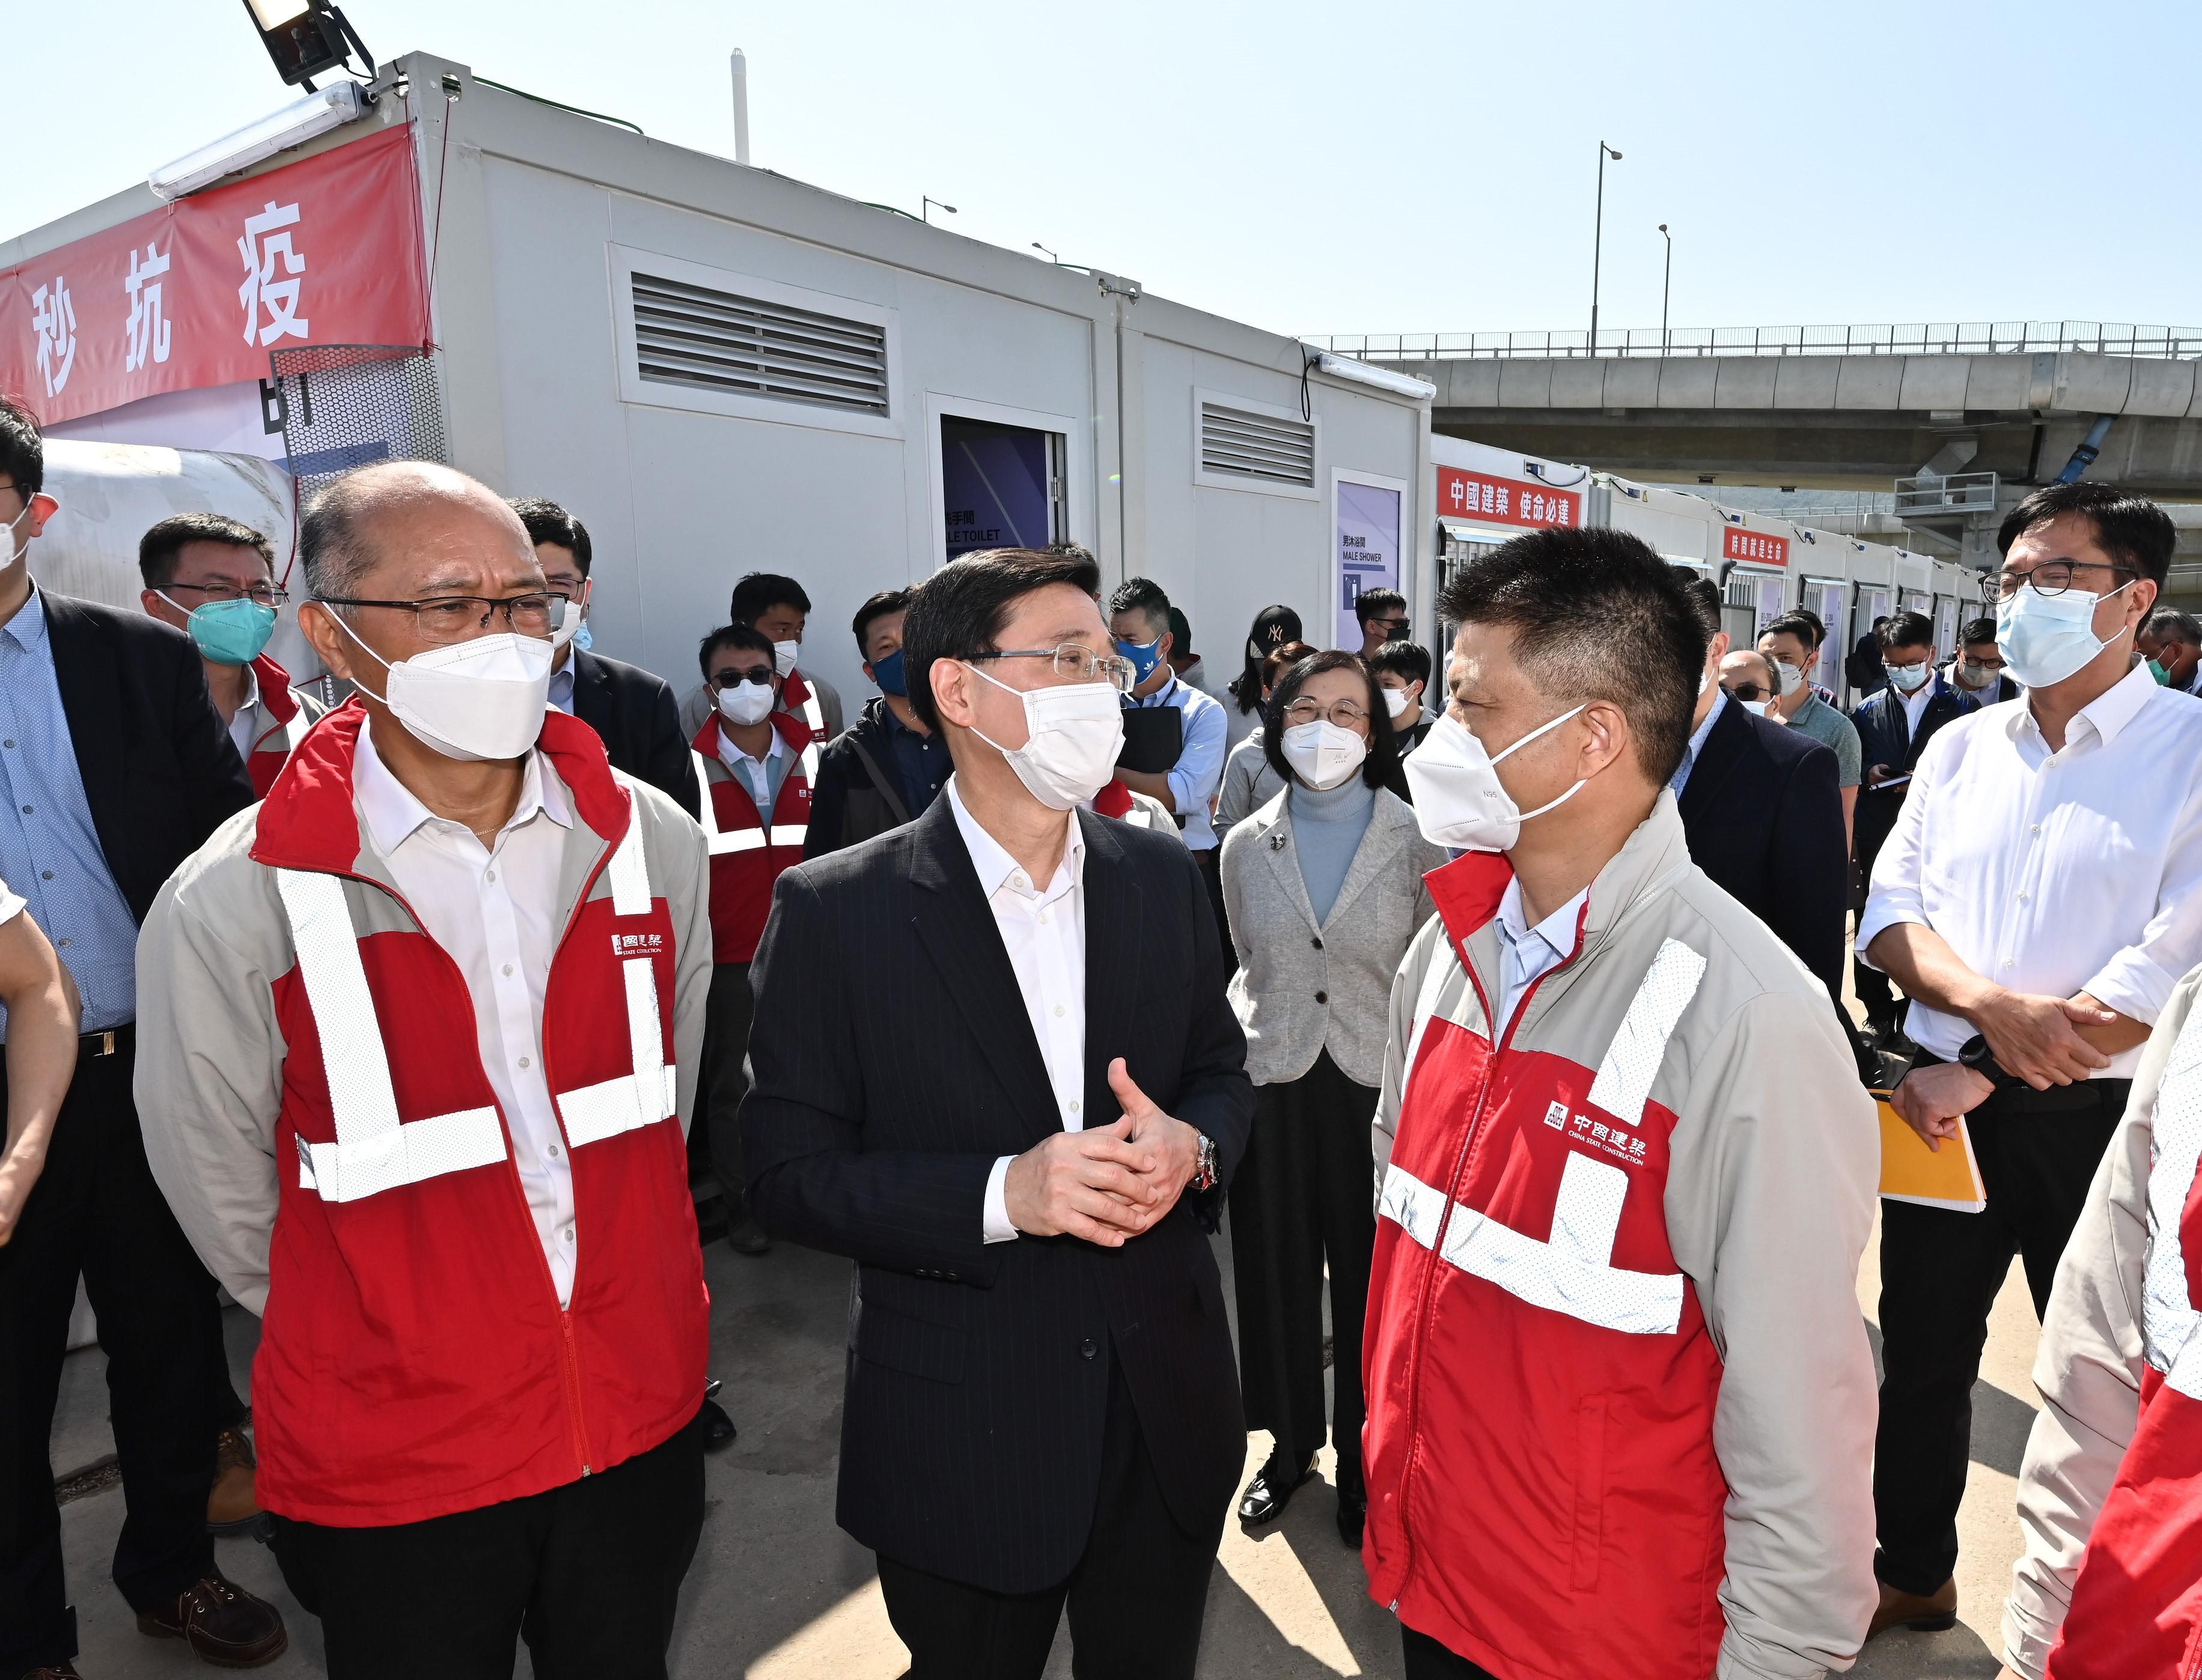 The Chief Secretary for Administration, Mr John Lee, this morning (March 12) visited the third community isolation facility constructed with Mainland support on the Hong Kong Boundary Crossing Facilities Island of the Hong Kong-Zhuhai-Macao Bridge. Photo shows Mr Lee (second left) chatting with the Chairman and Non-executive Director of China State Construction International Holdings Limited, Mr Yan Jianguo (second right).